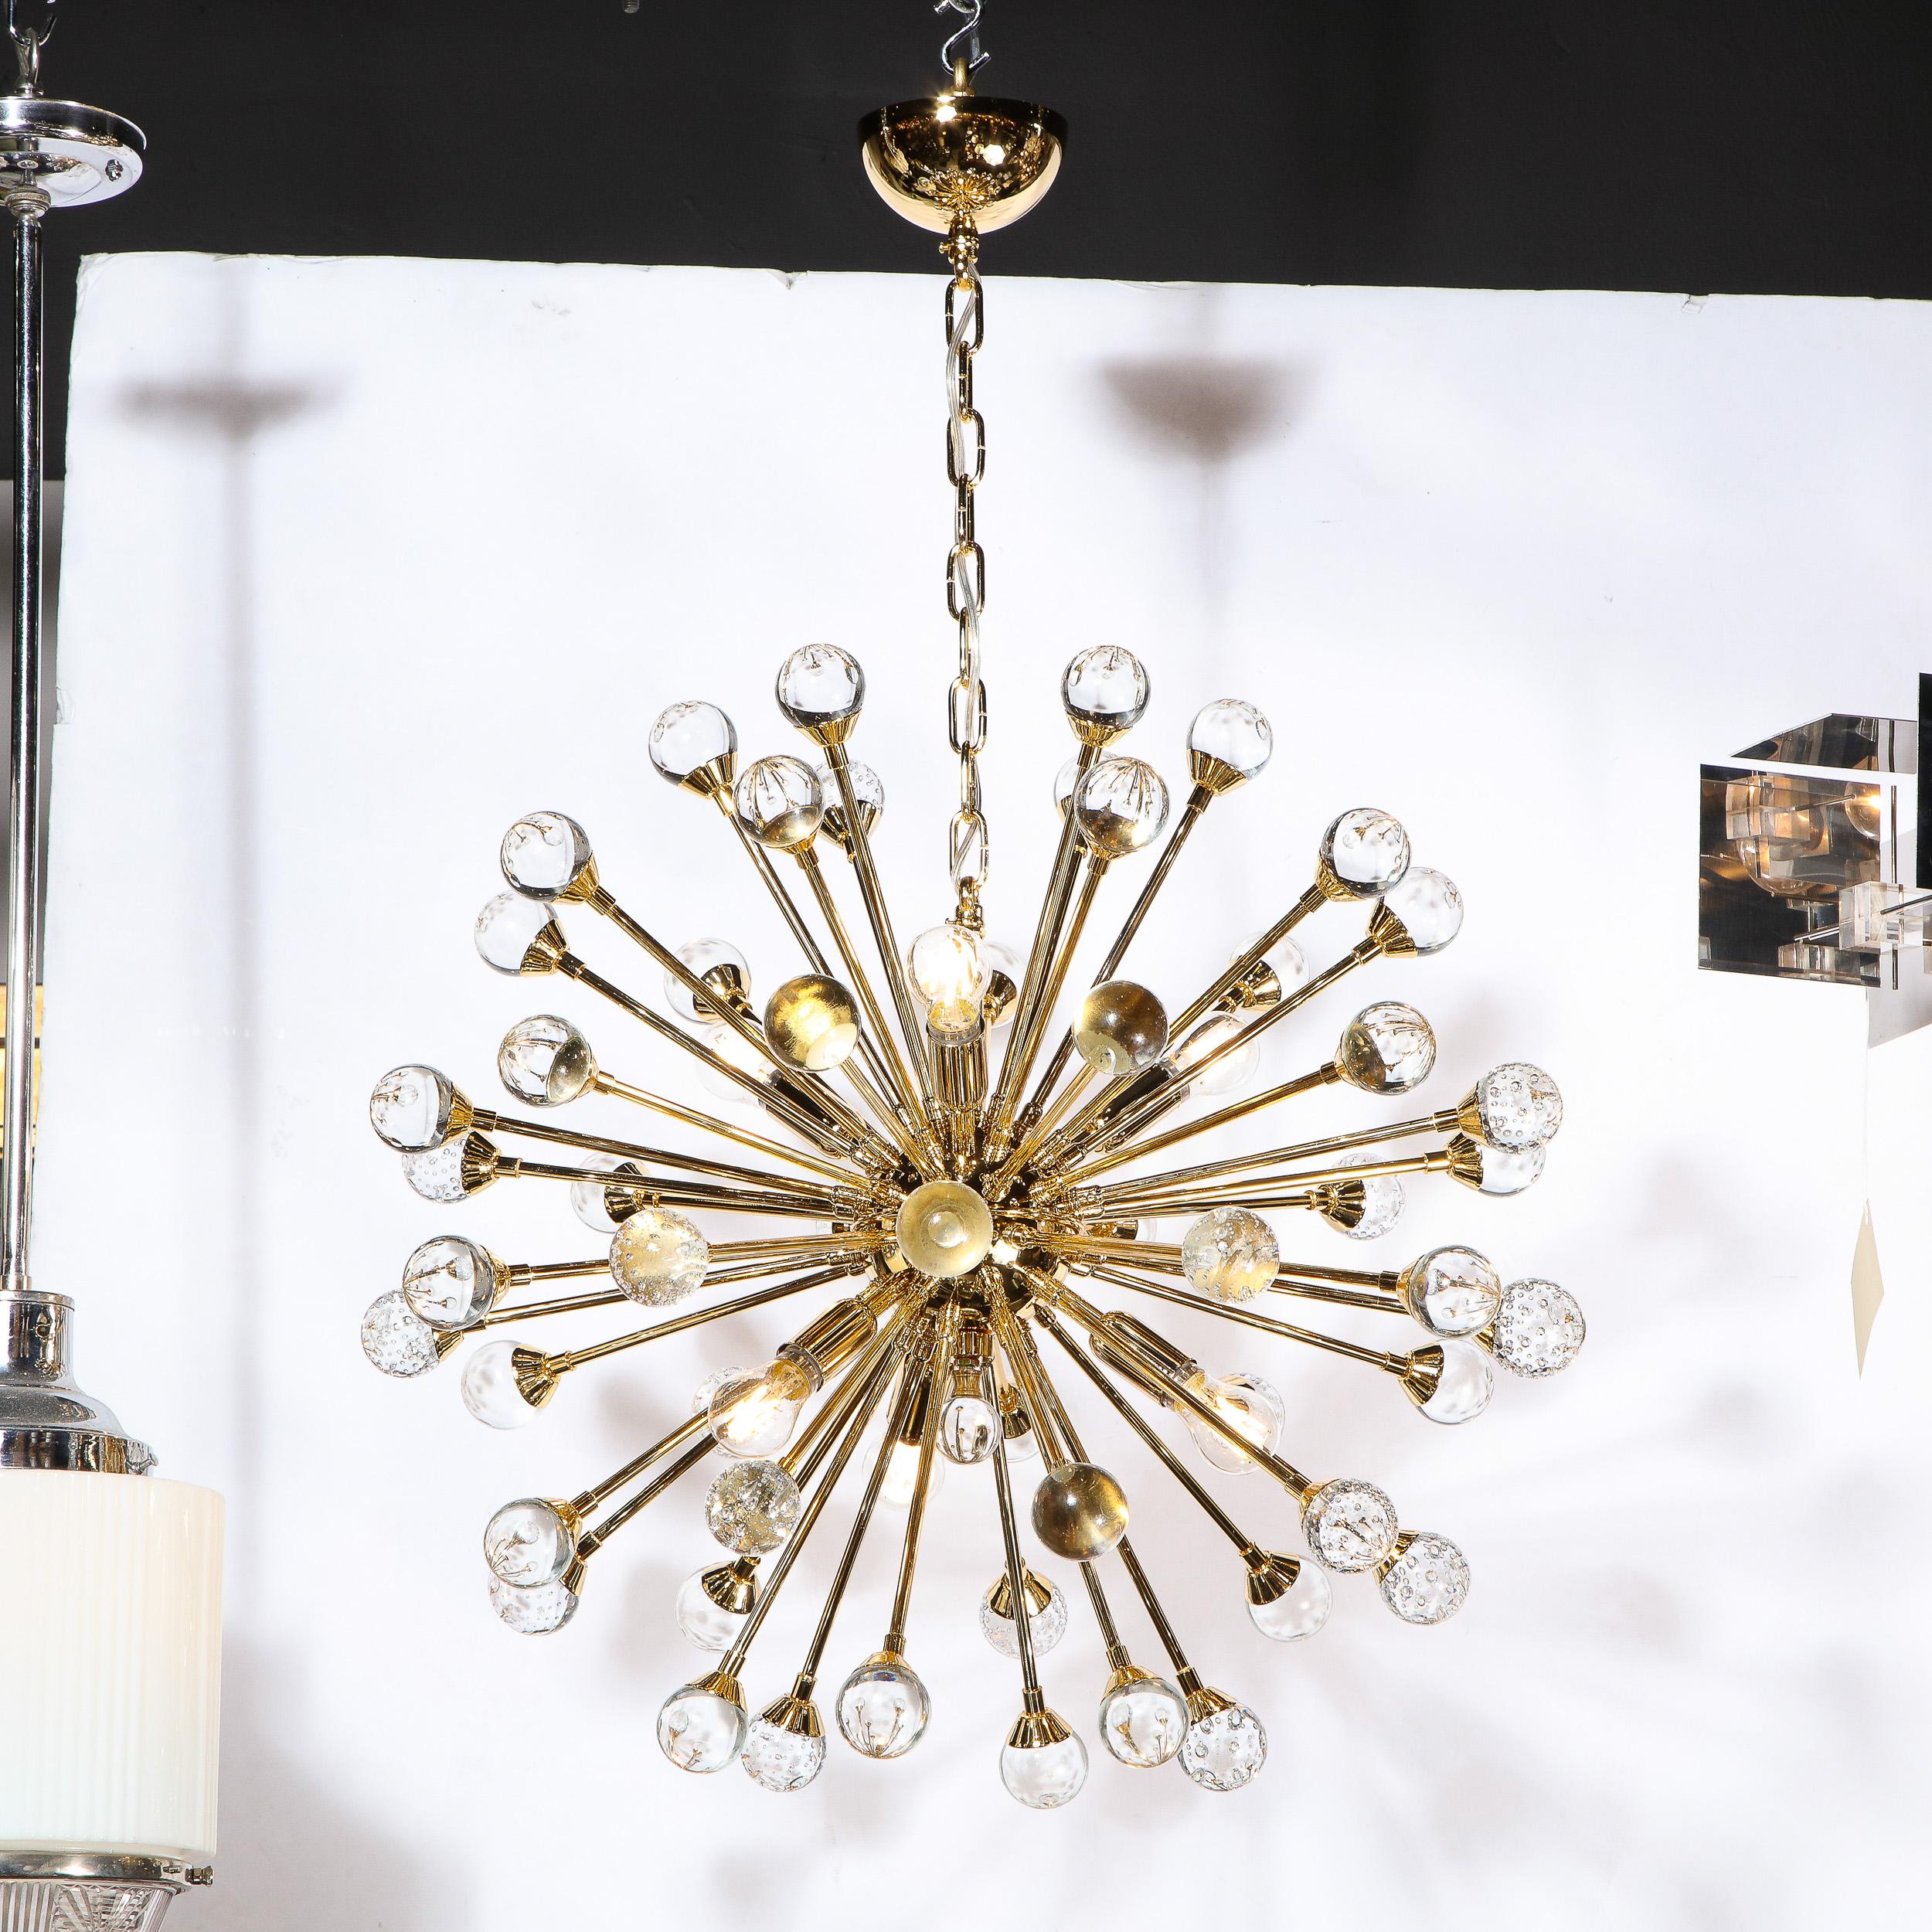 This stunning and graphic modernist sputnik chandelier was realized in Murano, Italy- the island off the coast of Venice renowned for centuries for its superlative glass production. It features a spherical body in lustrous polished brass with an